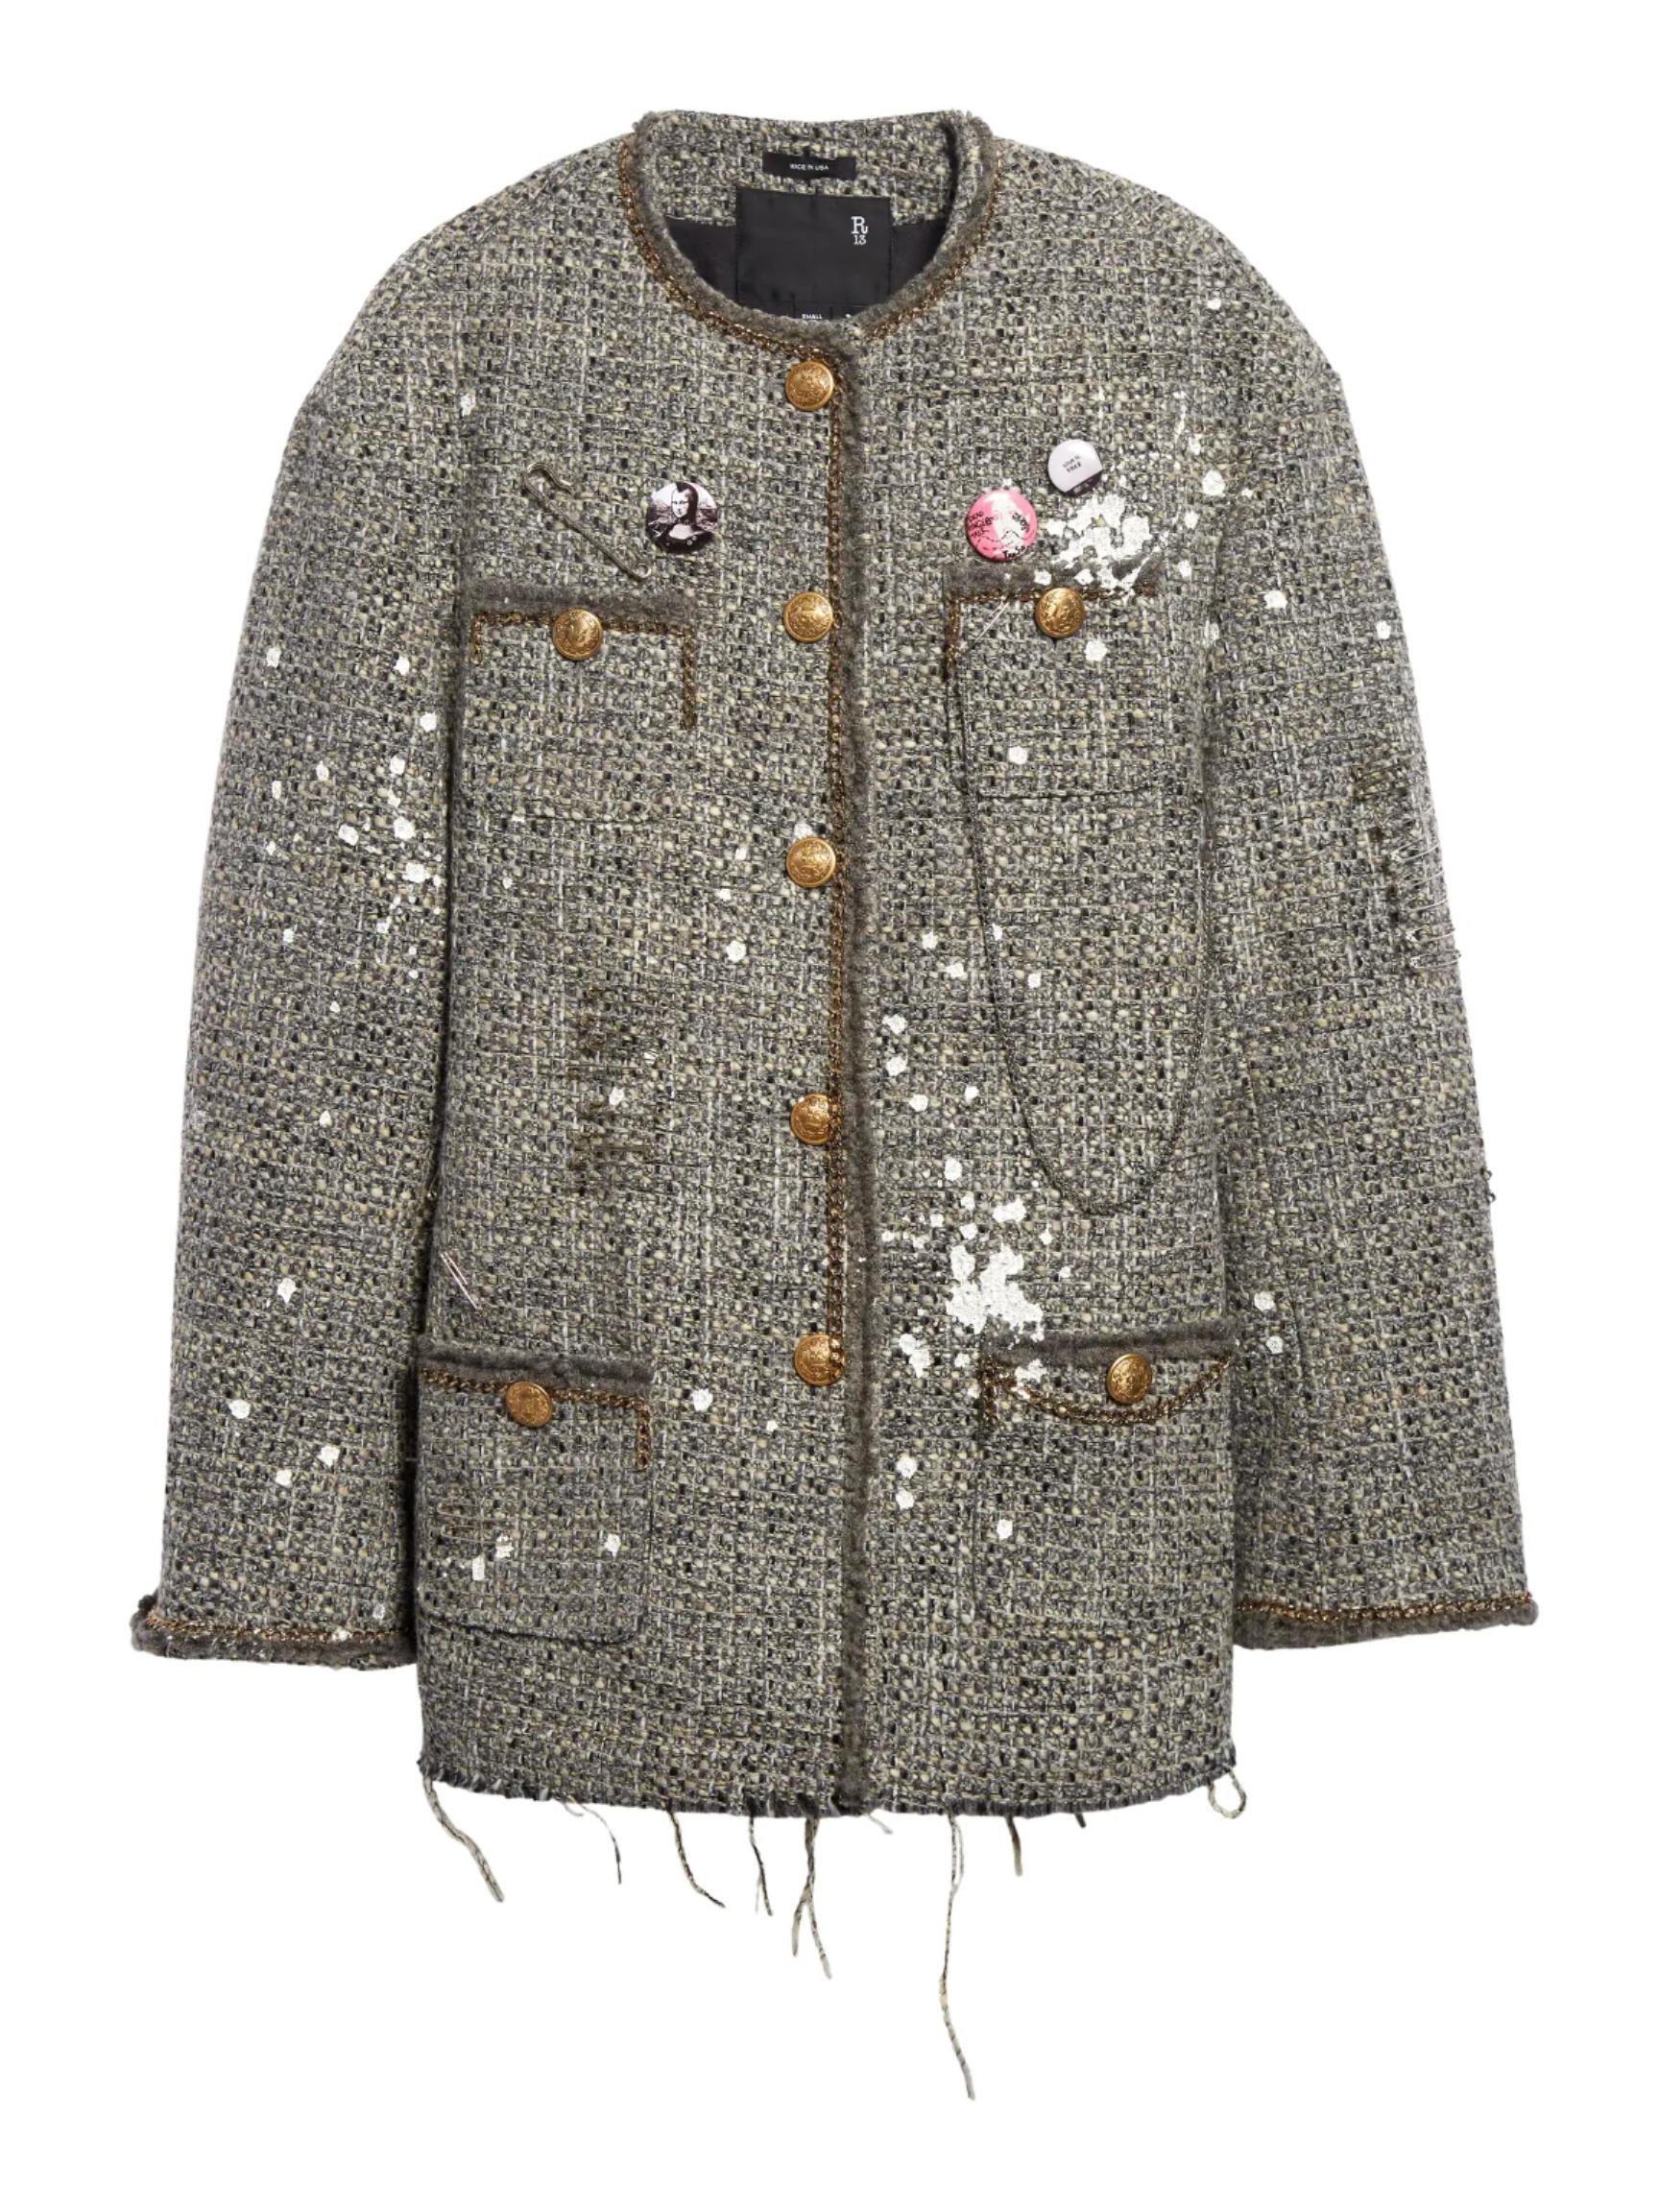 R13 Slouch Tweed Jacket in Gray